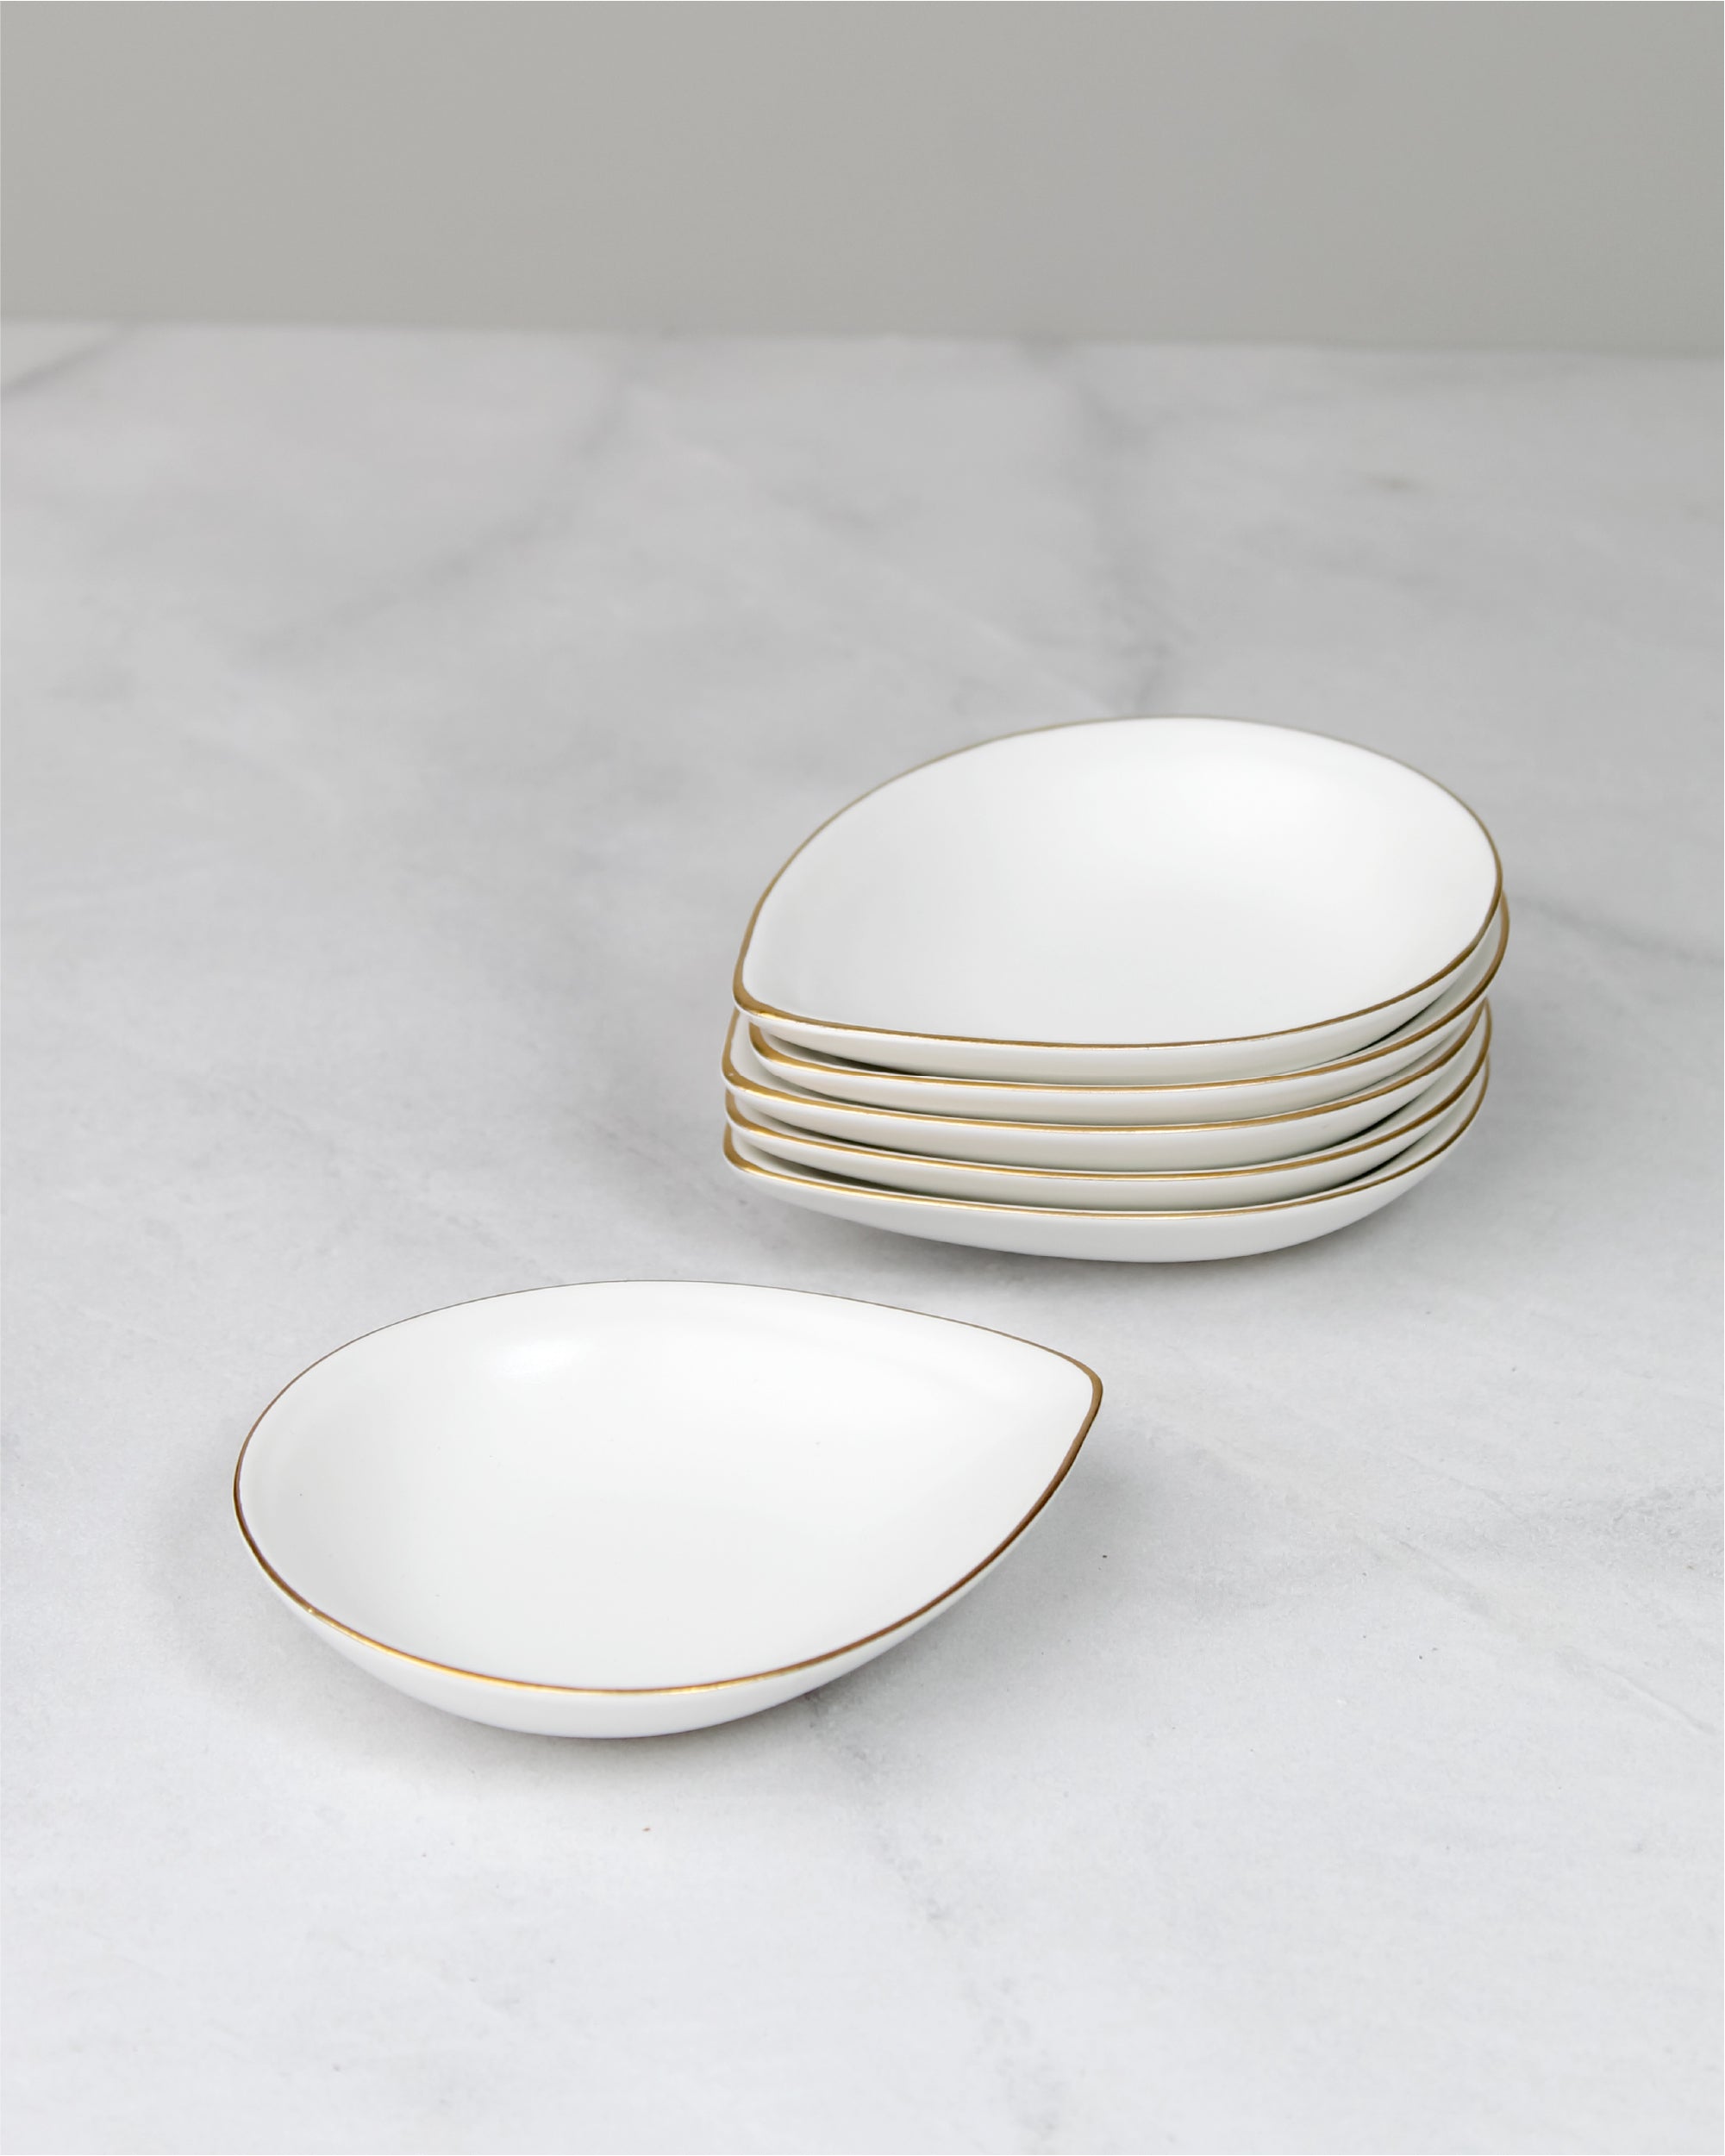 White Color || Bloom Vegas Acute Shaped Dish - Contemporary Elegance for Culinary Creations - Vola Global